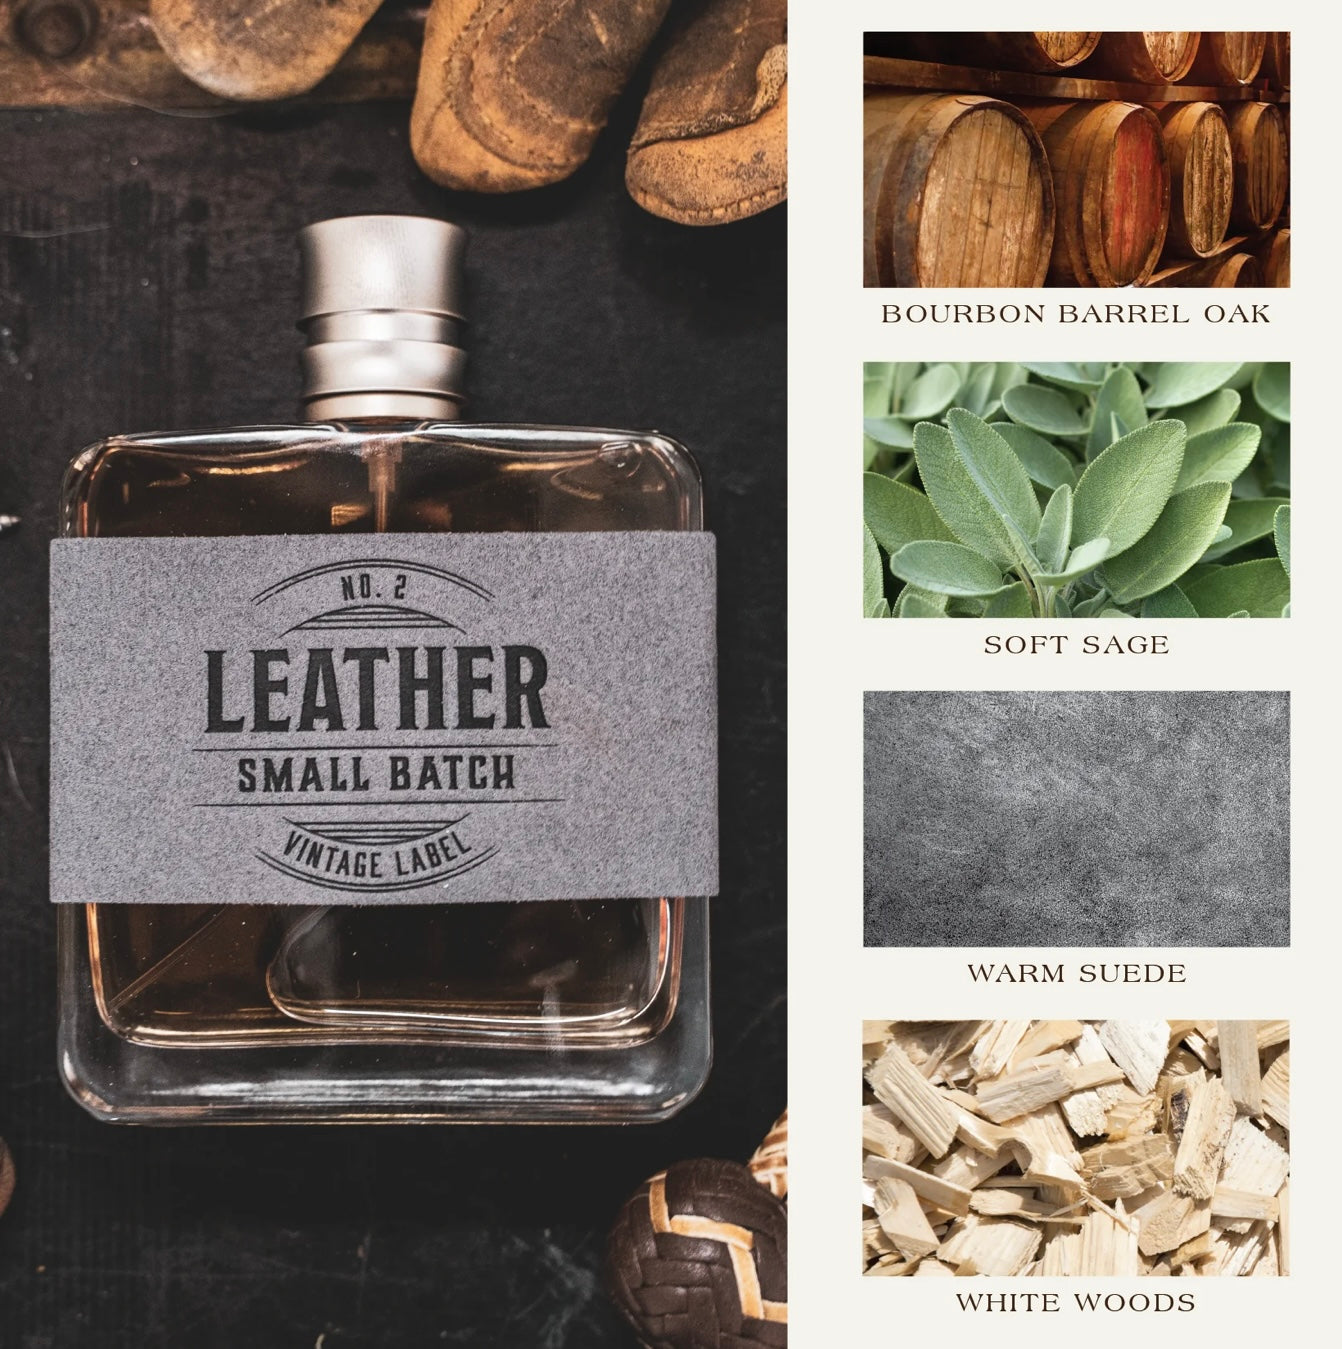 Leather No. 2 Cologne